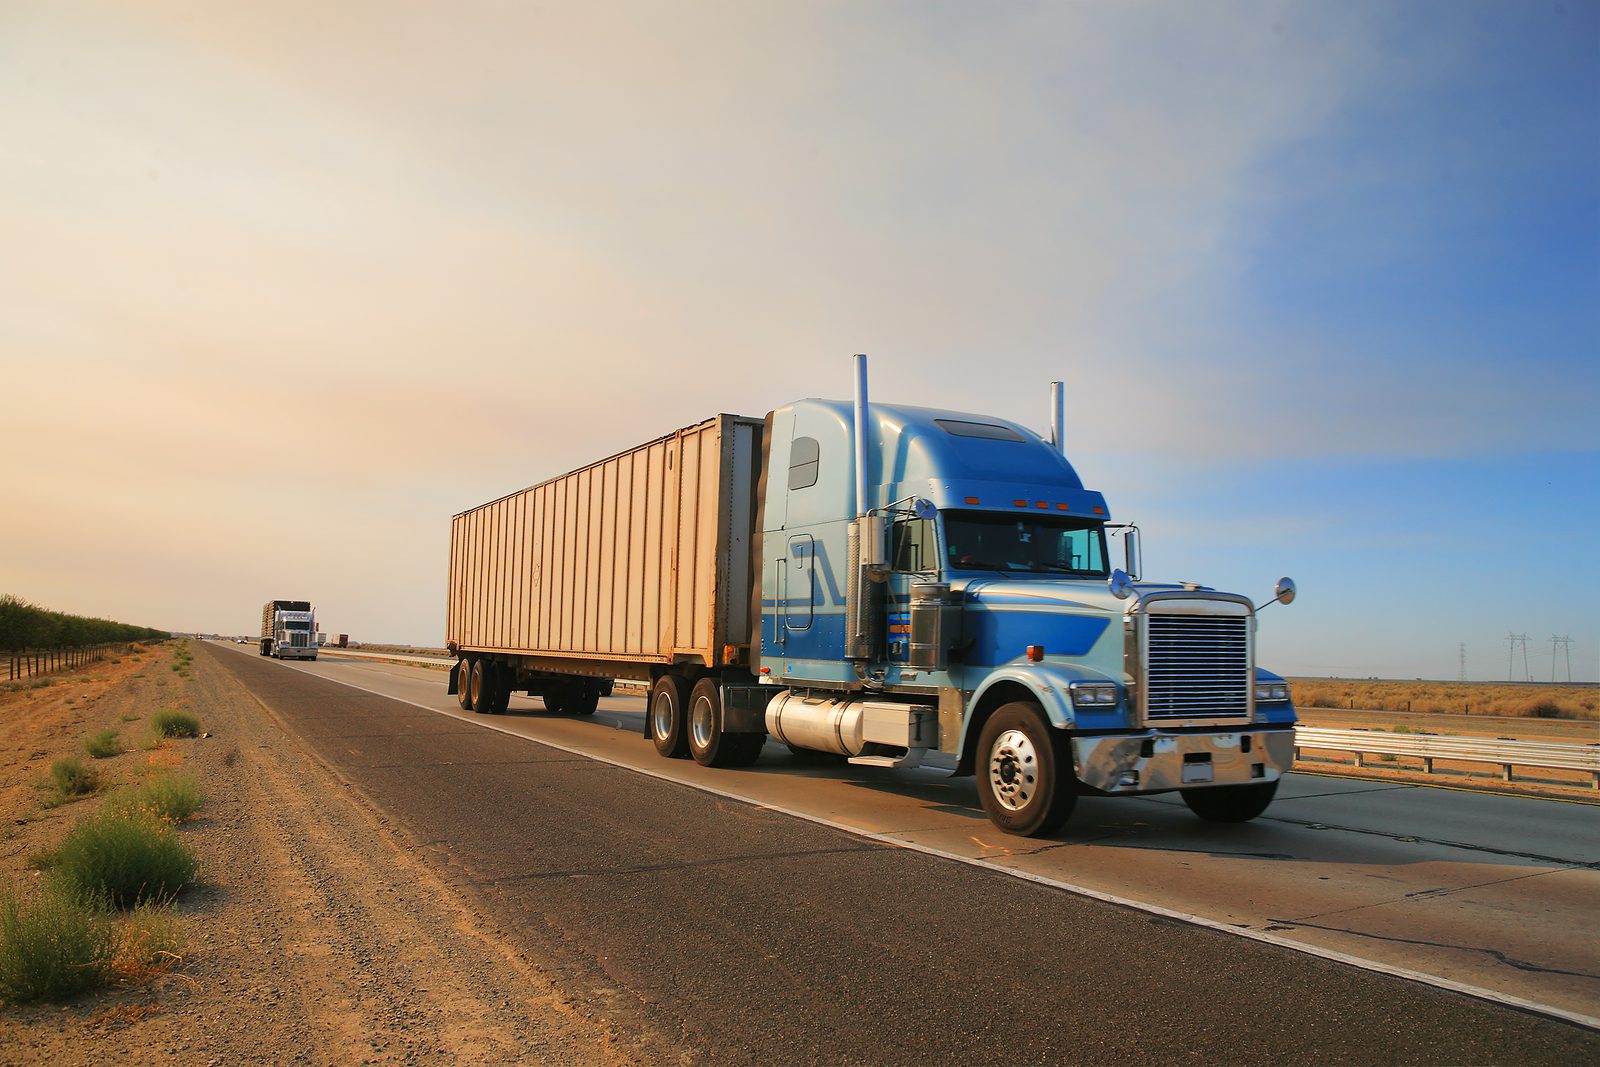 Houston TX insurance cost for tractor trailer